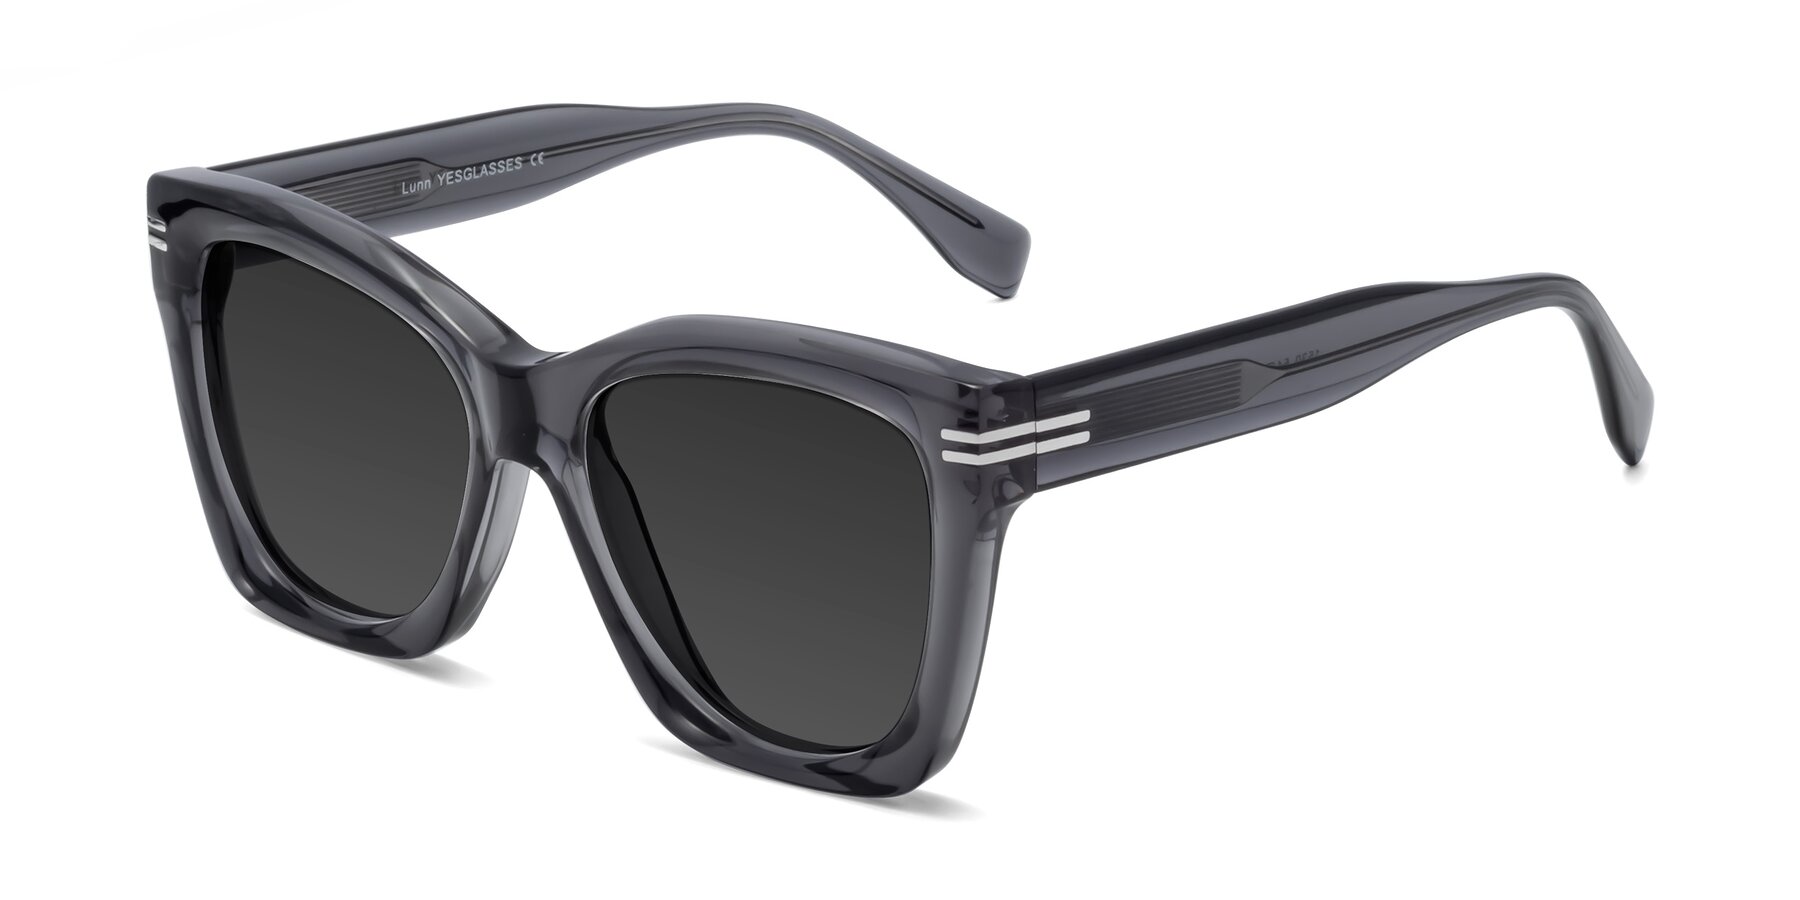 Angle of Lunn in Translucent Gray with Gray Tinted Lenses